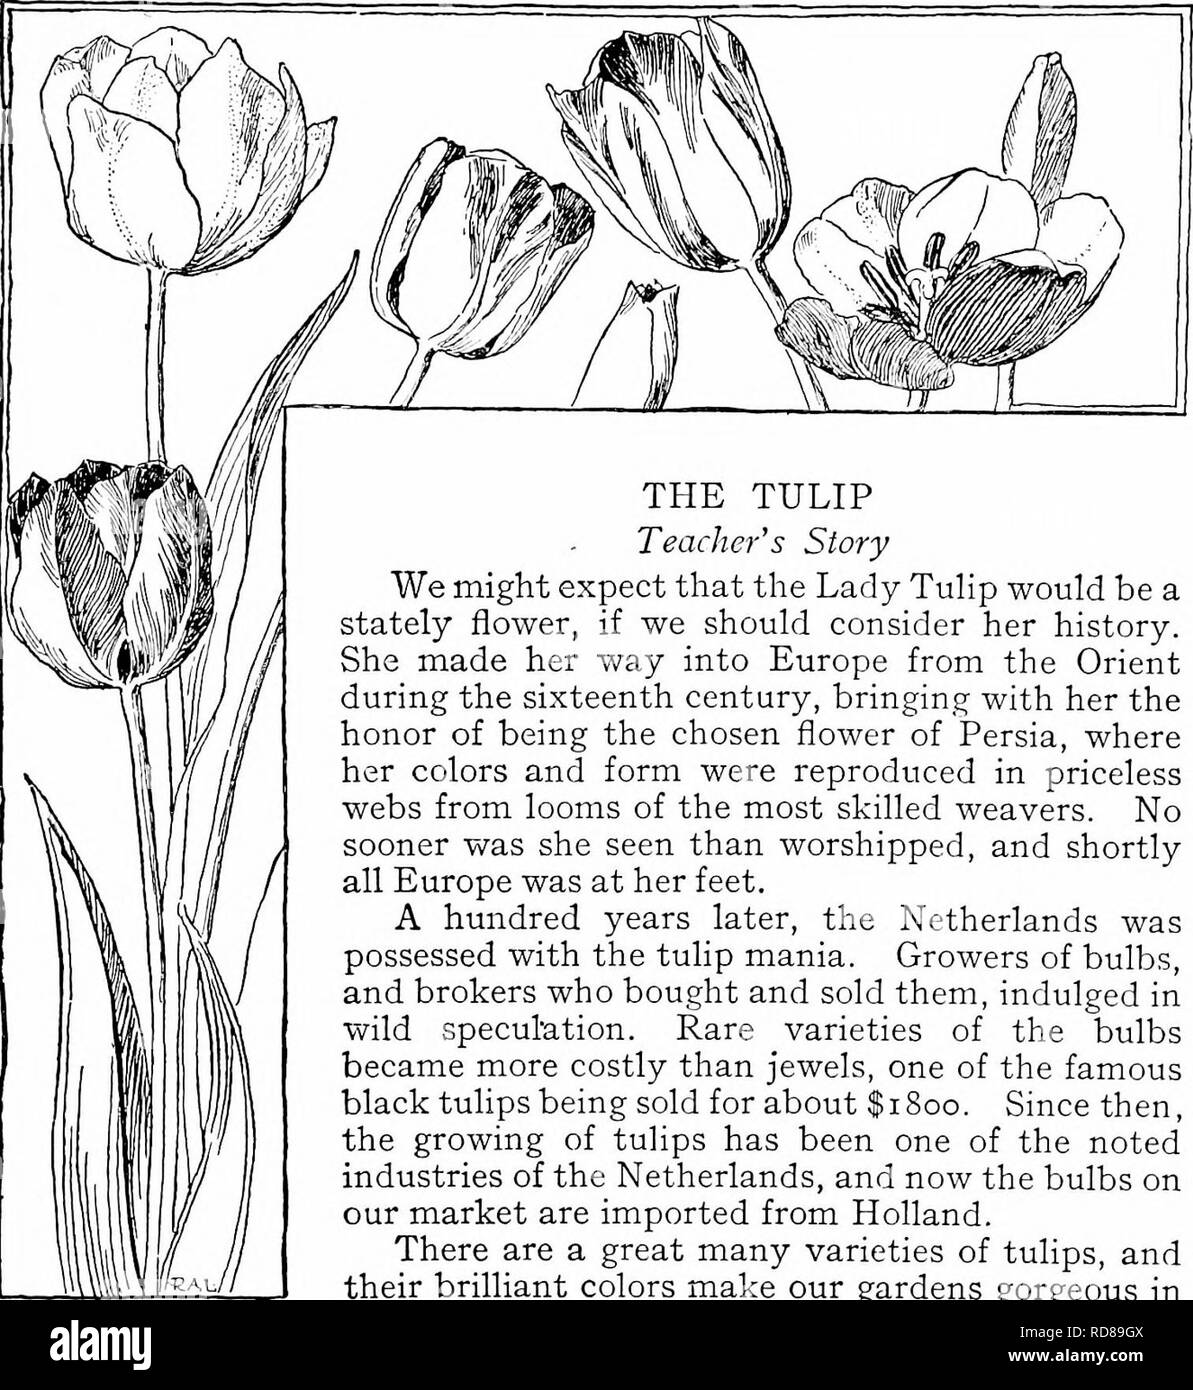 . Handbook of nature-study for teachers and parents, based on the Cornell nature-study leaflets. Nature study. Cultivated-Plant Study 603. THE TULIP Teacher's Story We might expect that the Lady Tuhp would be a stately flower, if we should consider her history. She made her way into Europe from the Orient during the sixteenth century, bringing with her the honor of being the chosen flower of Persia, where her colors and form were reproduced in priceless webs from looms of the most skilled weavers. No sooner was she seen than worshipped, and shortly all Europe was at her feet. A hundred years l Stock Photo